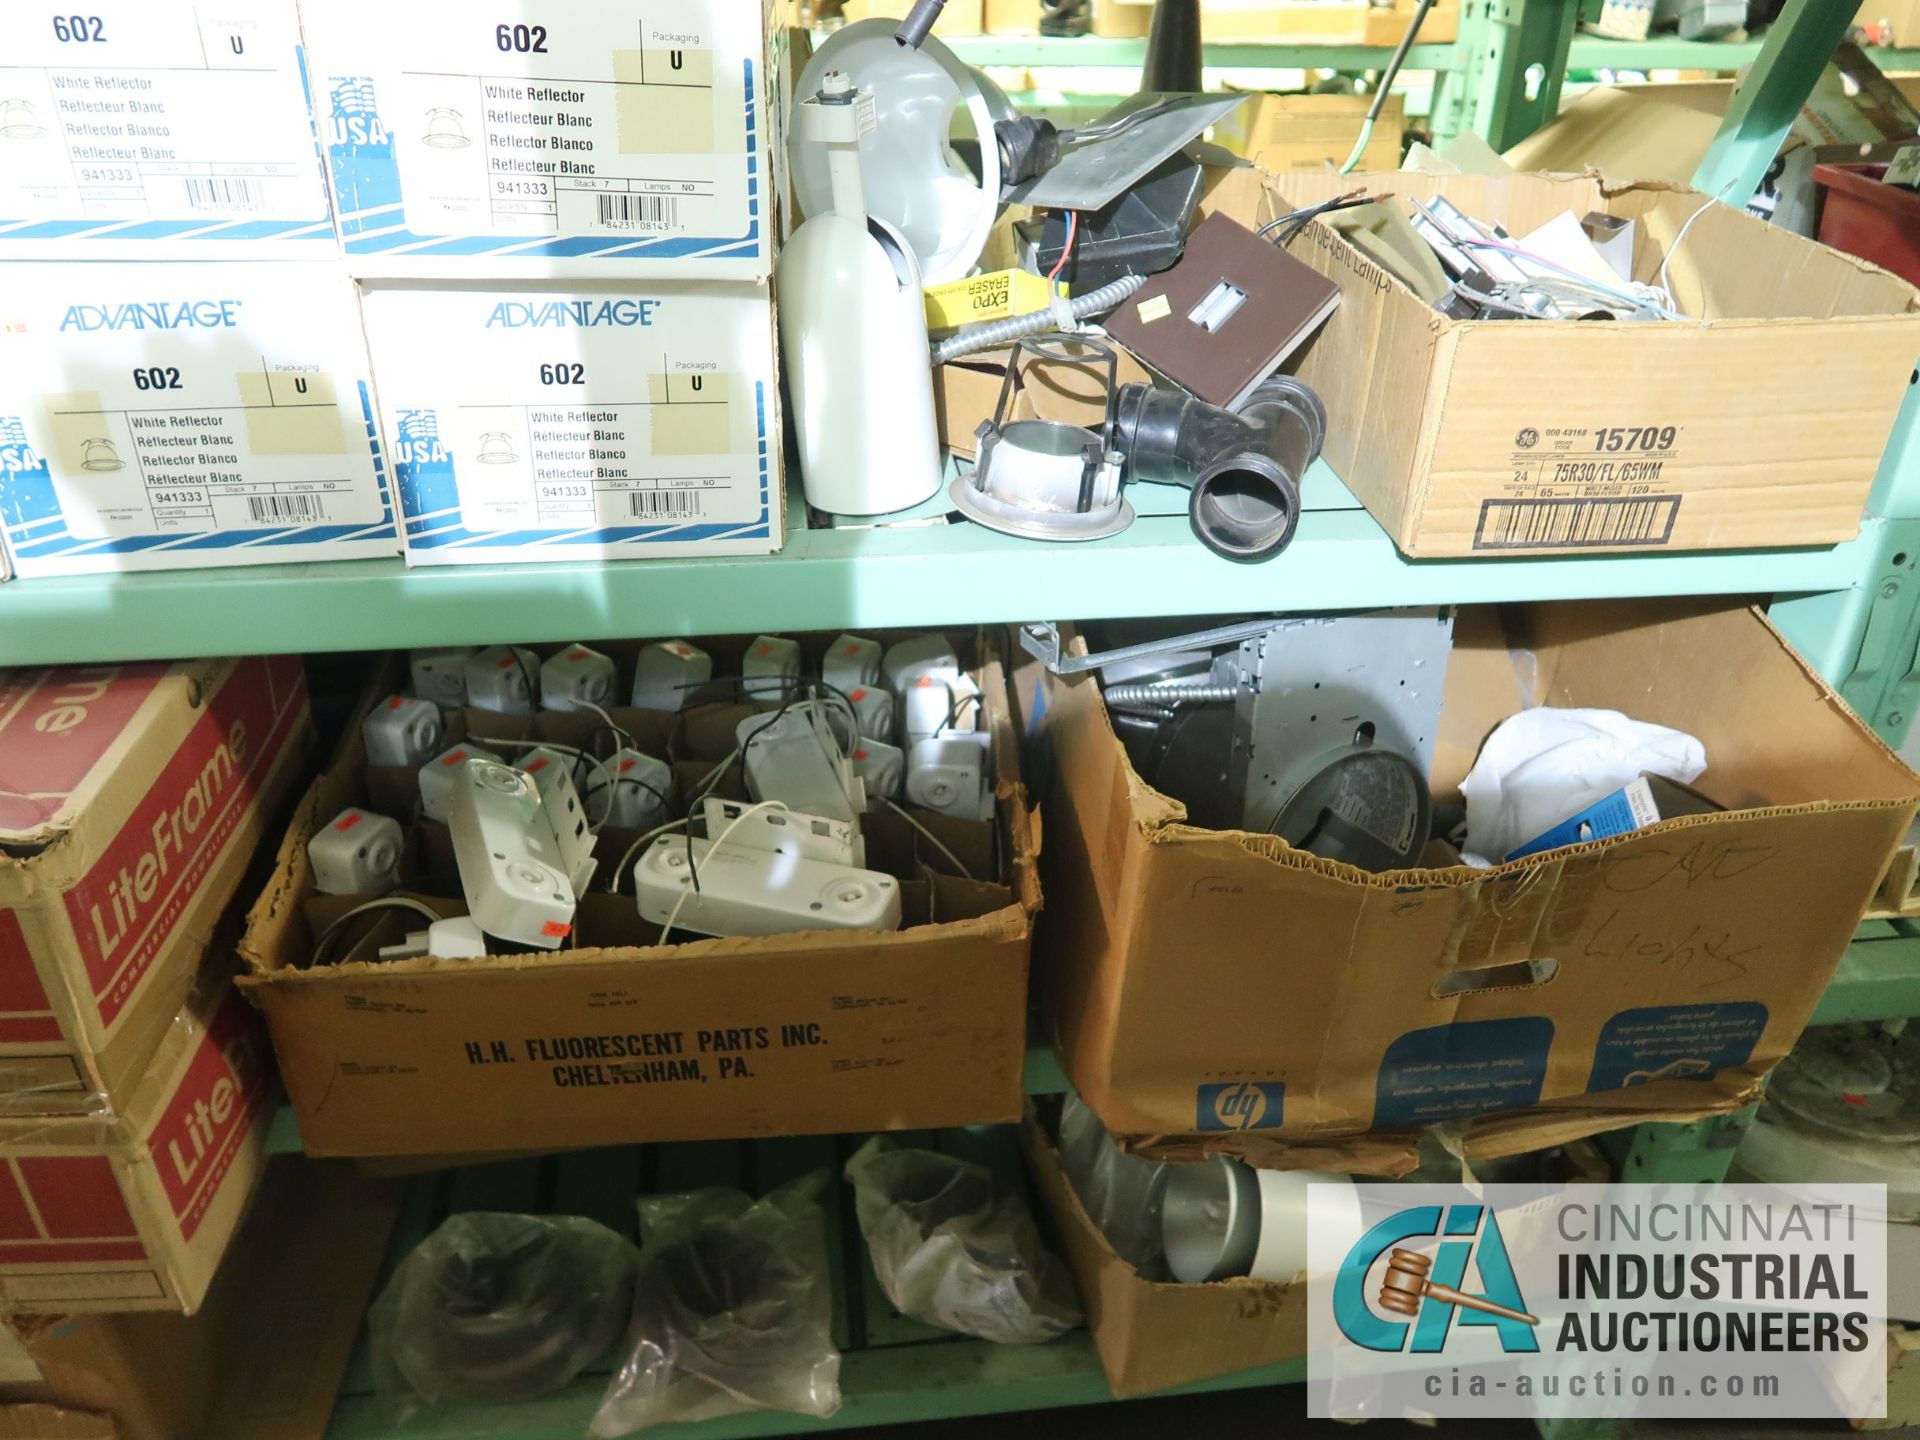 CONTENTS OF (5) RACKS INCLUDING MISCELLANEOUS LIGHTING, LAMP PARTS, VALVES **NO RACKS** - Image 7 of 25